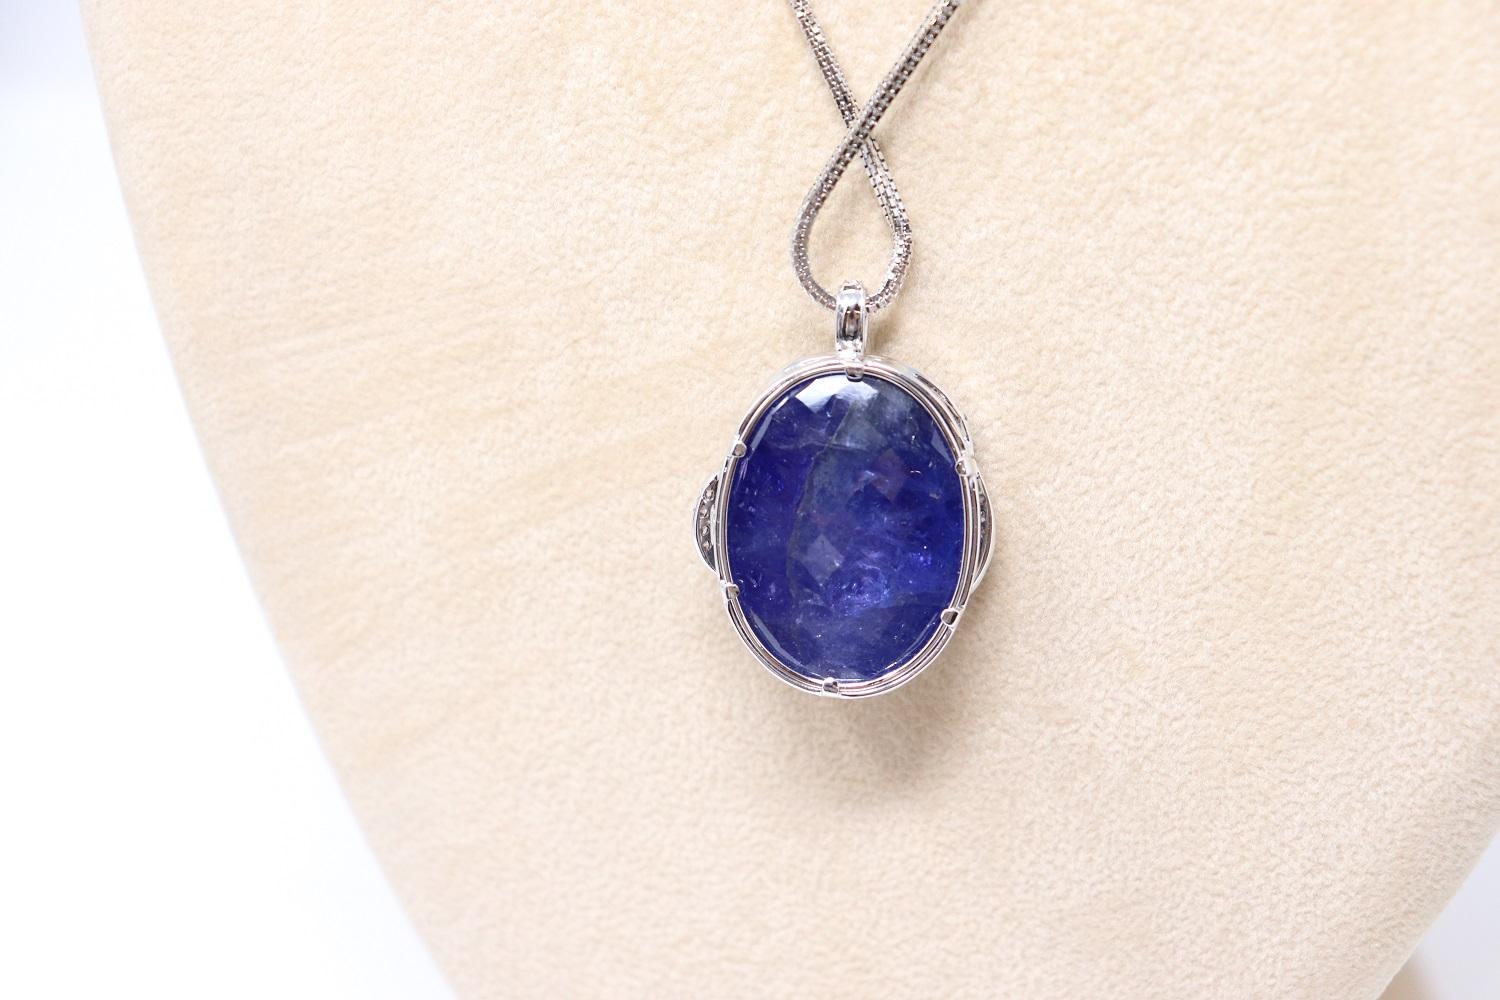 65 Ct Tanzanite and Diamond Pendant Necklace in 18 Kt White Gold For Sale 4